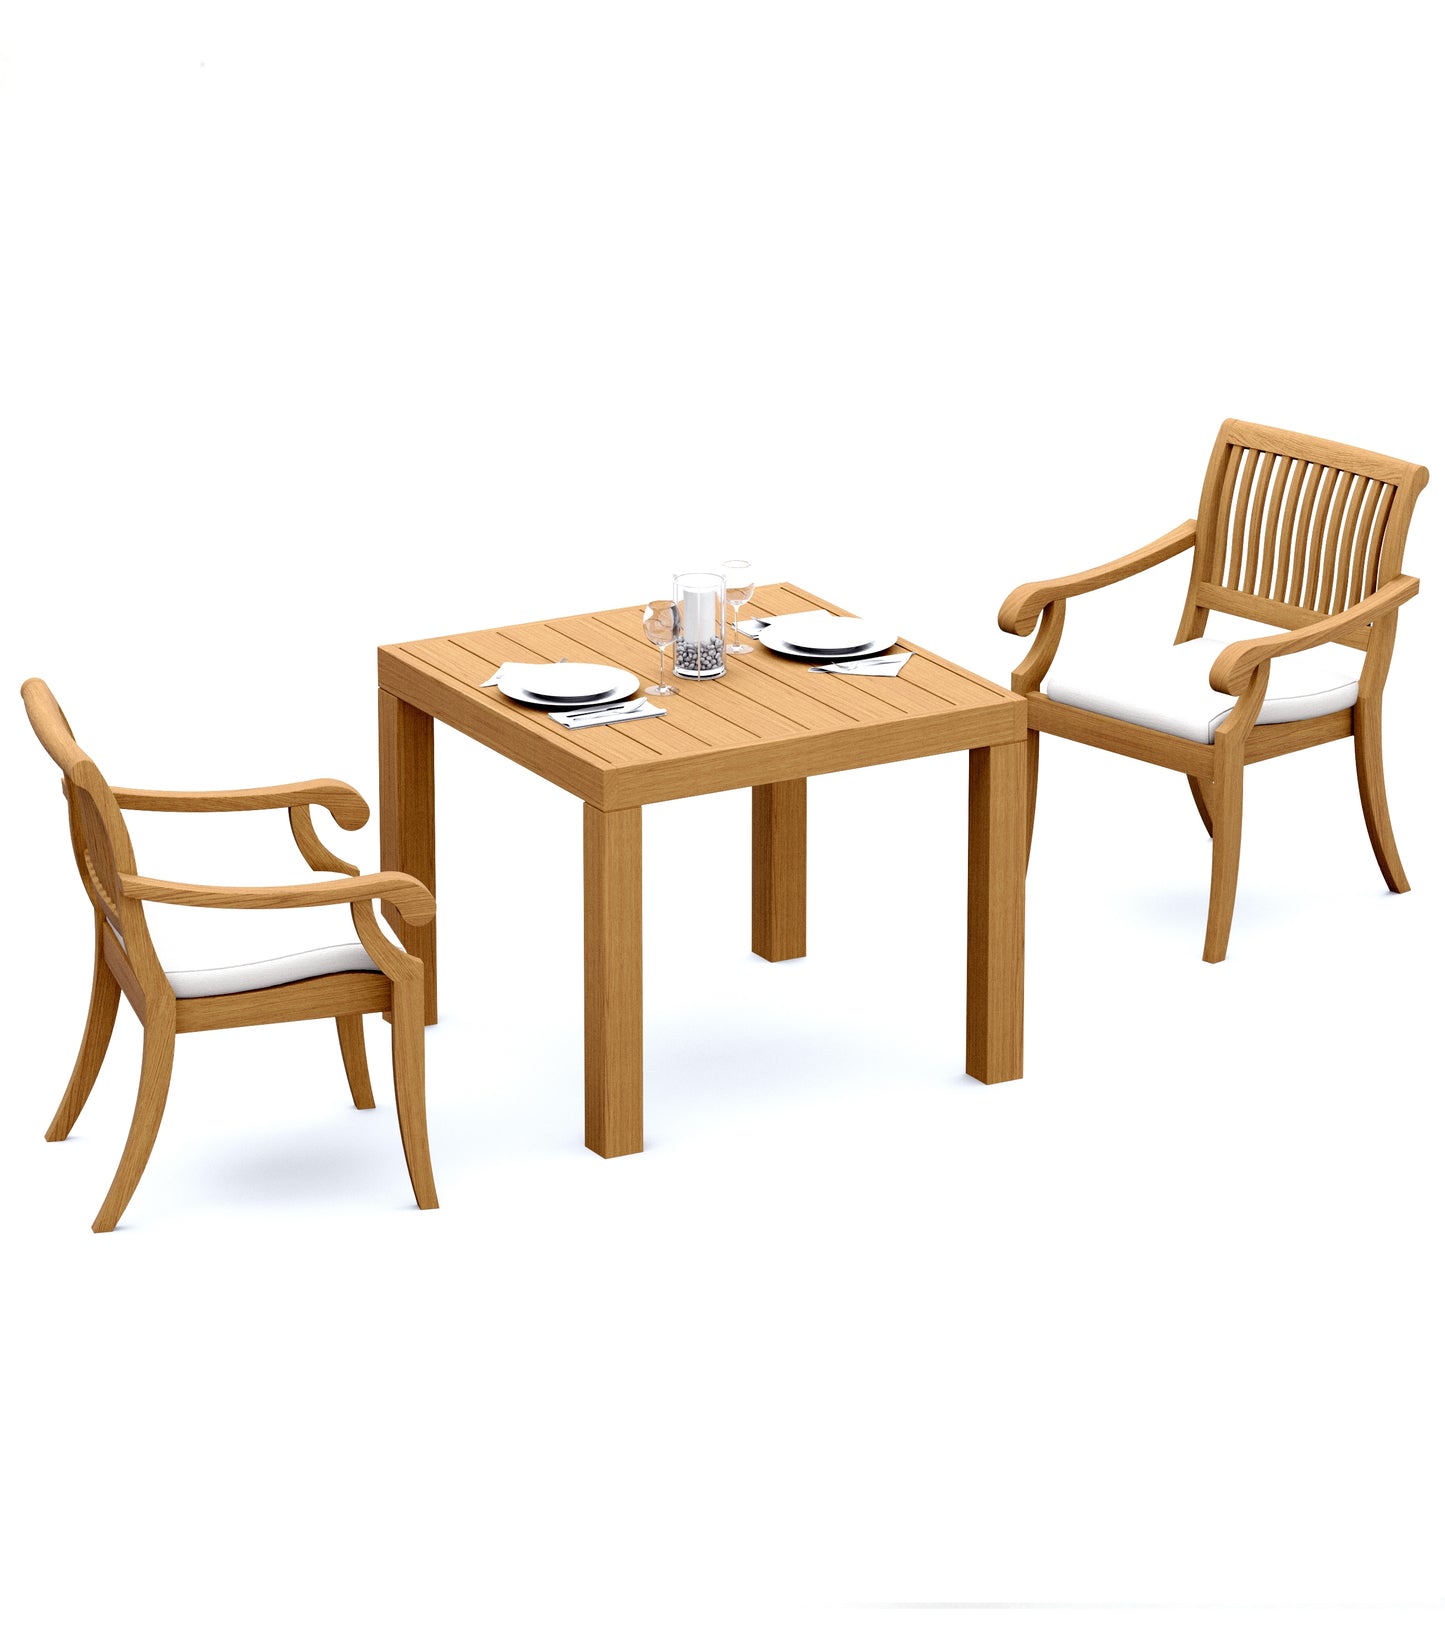 36" Square Table with Arbor Arm Chairs